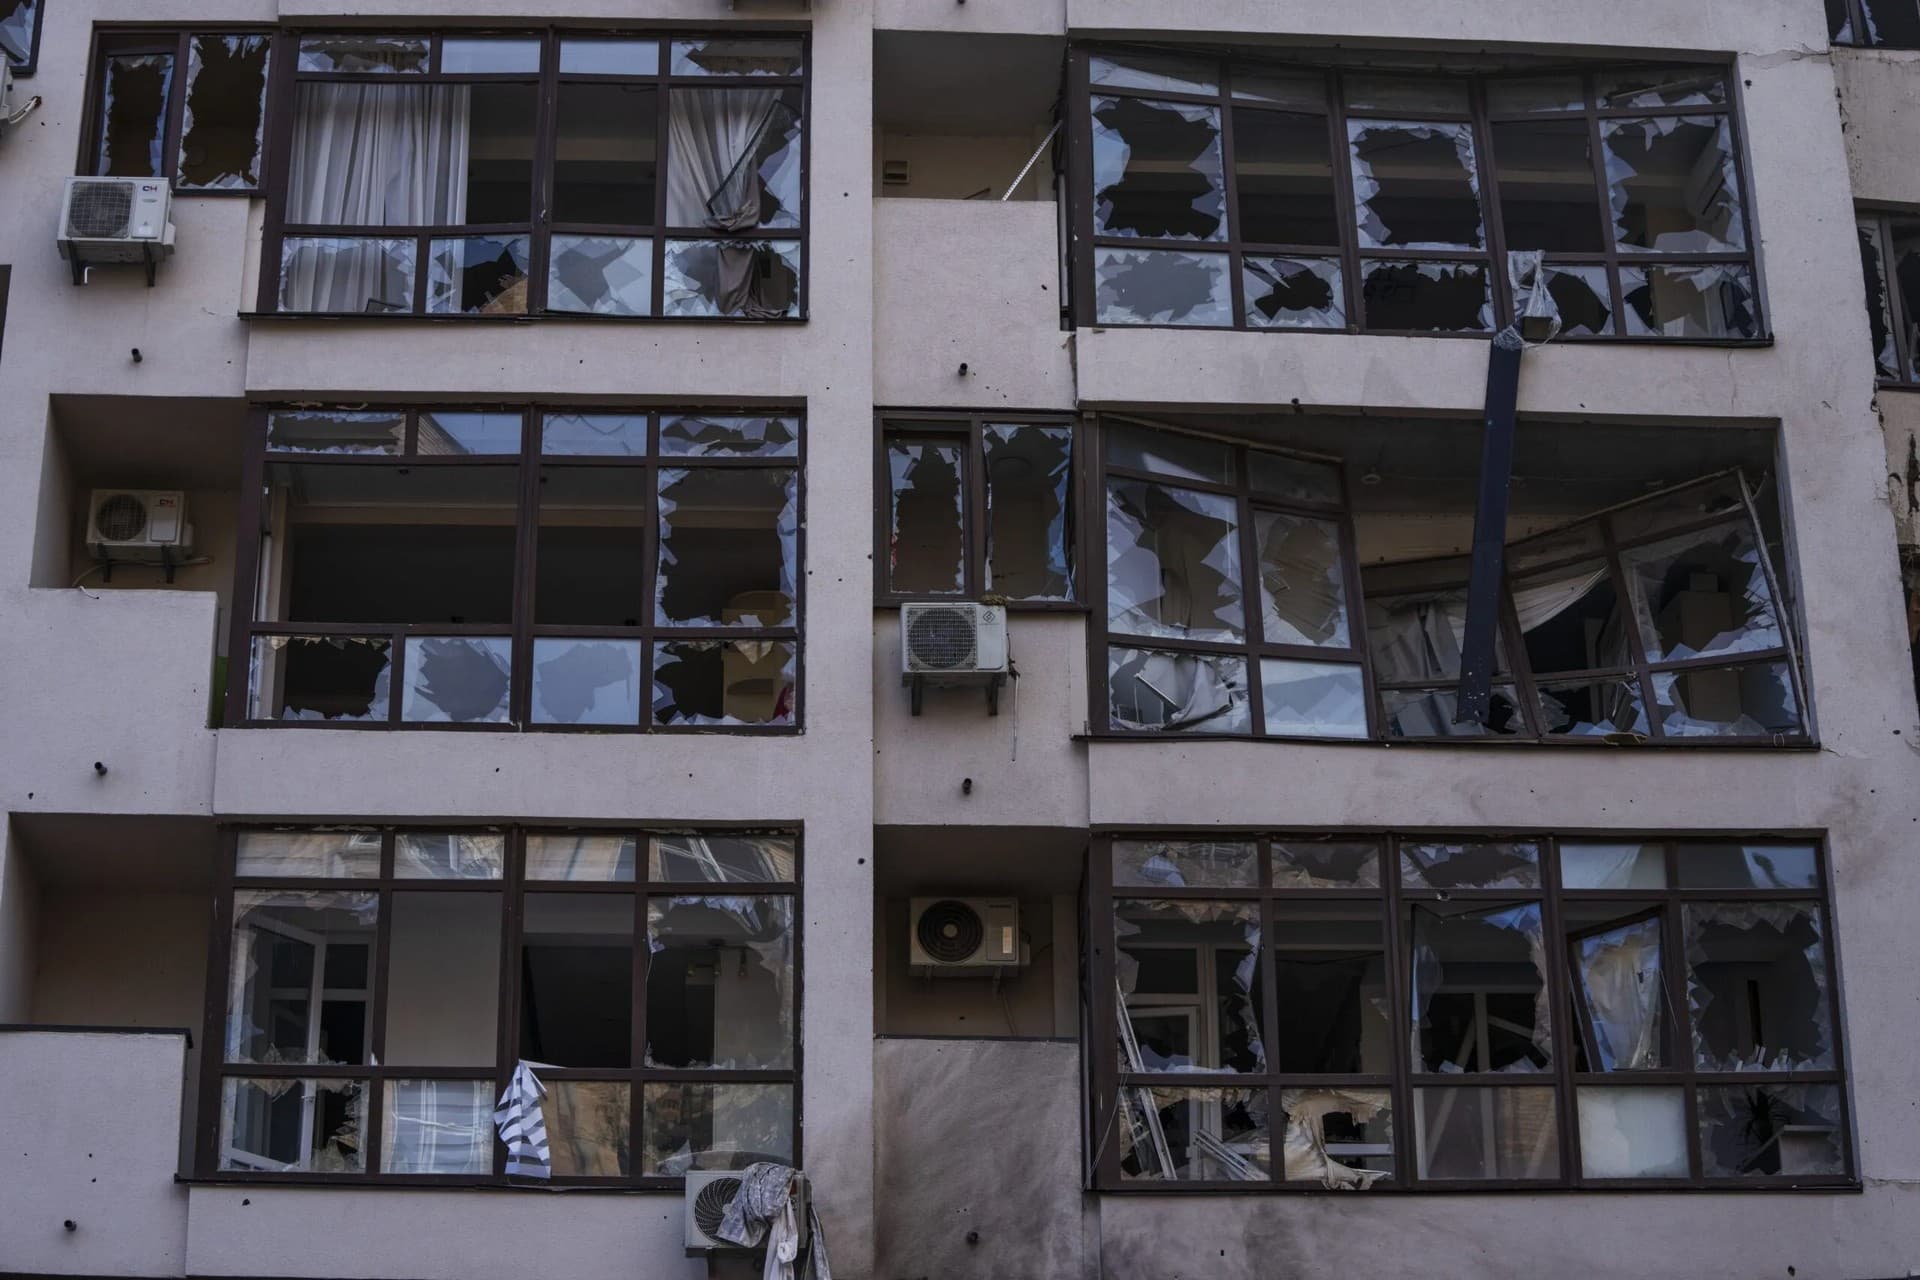 Damage at the scene of a residential building following explosions, in Kyiv